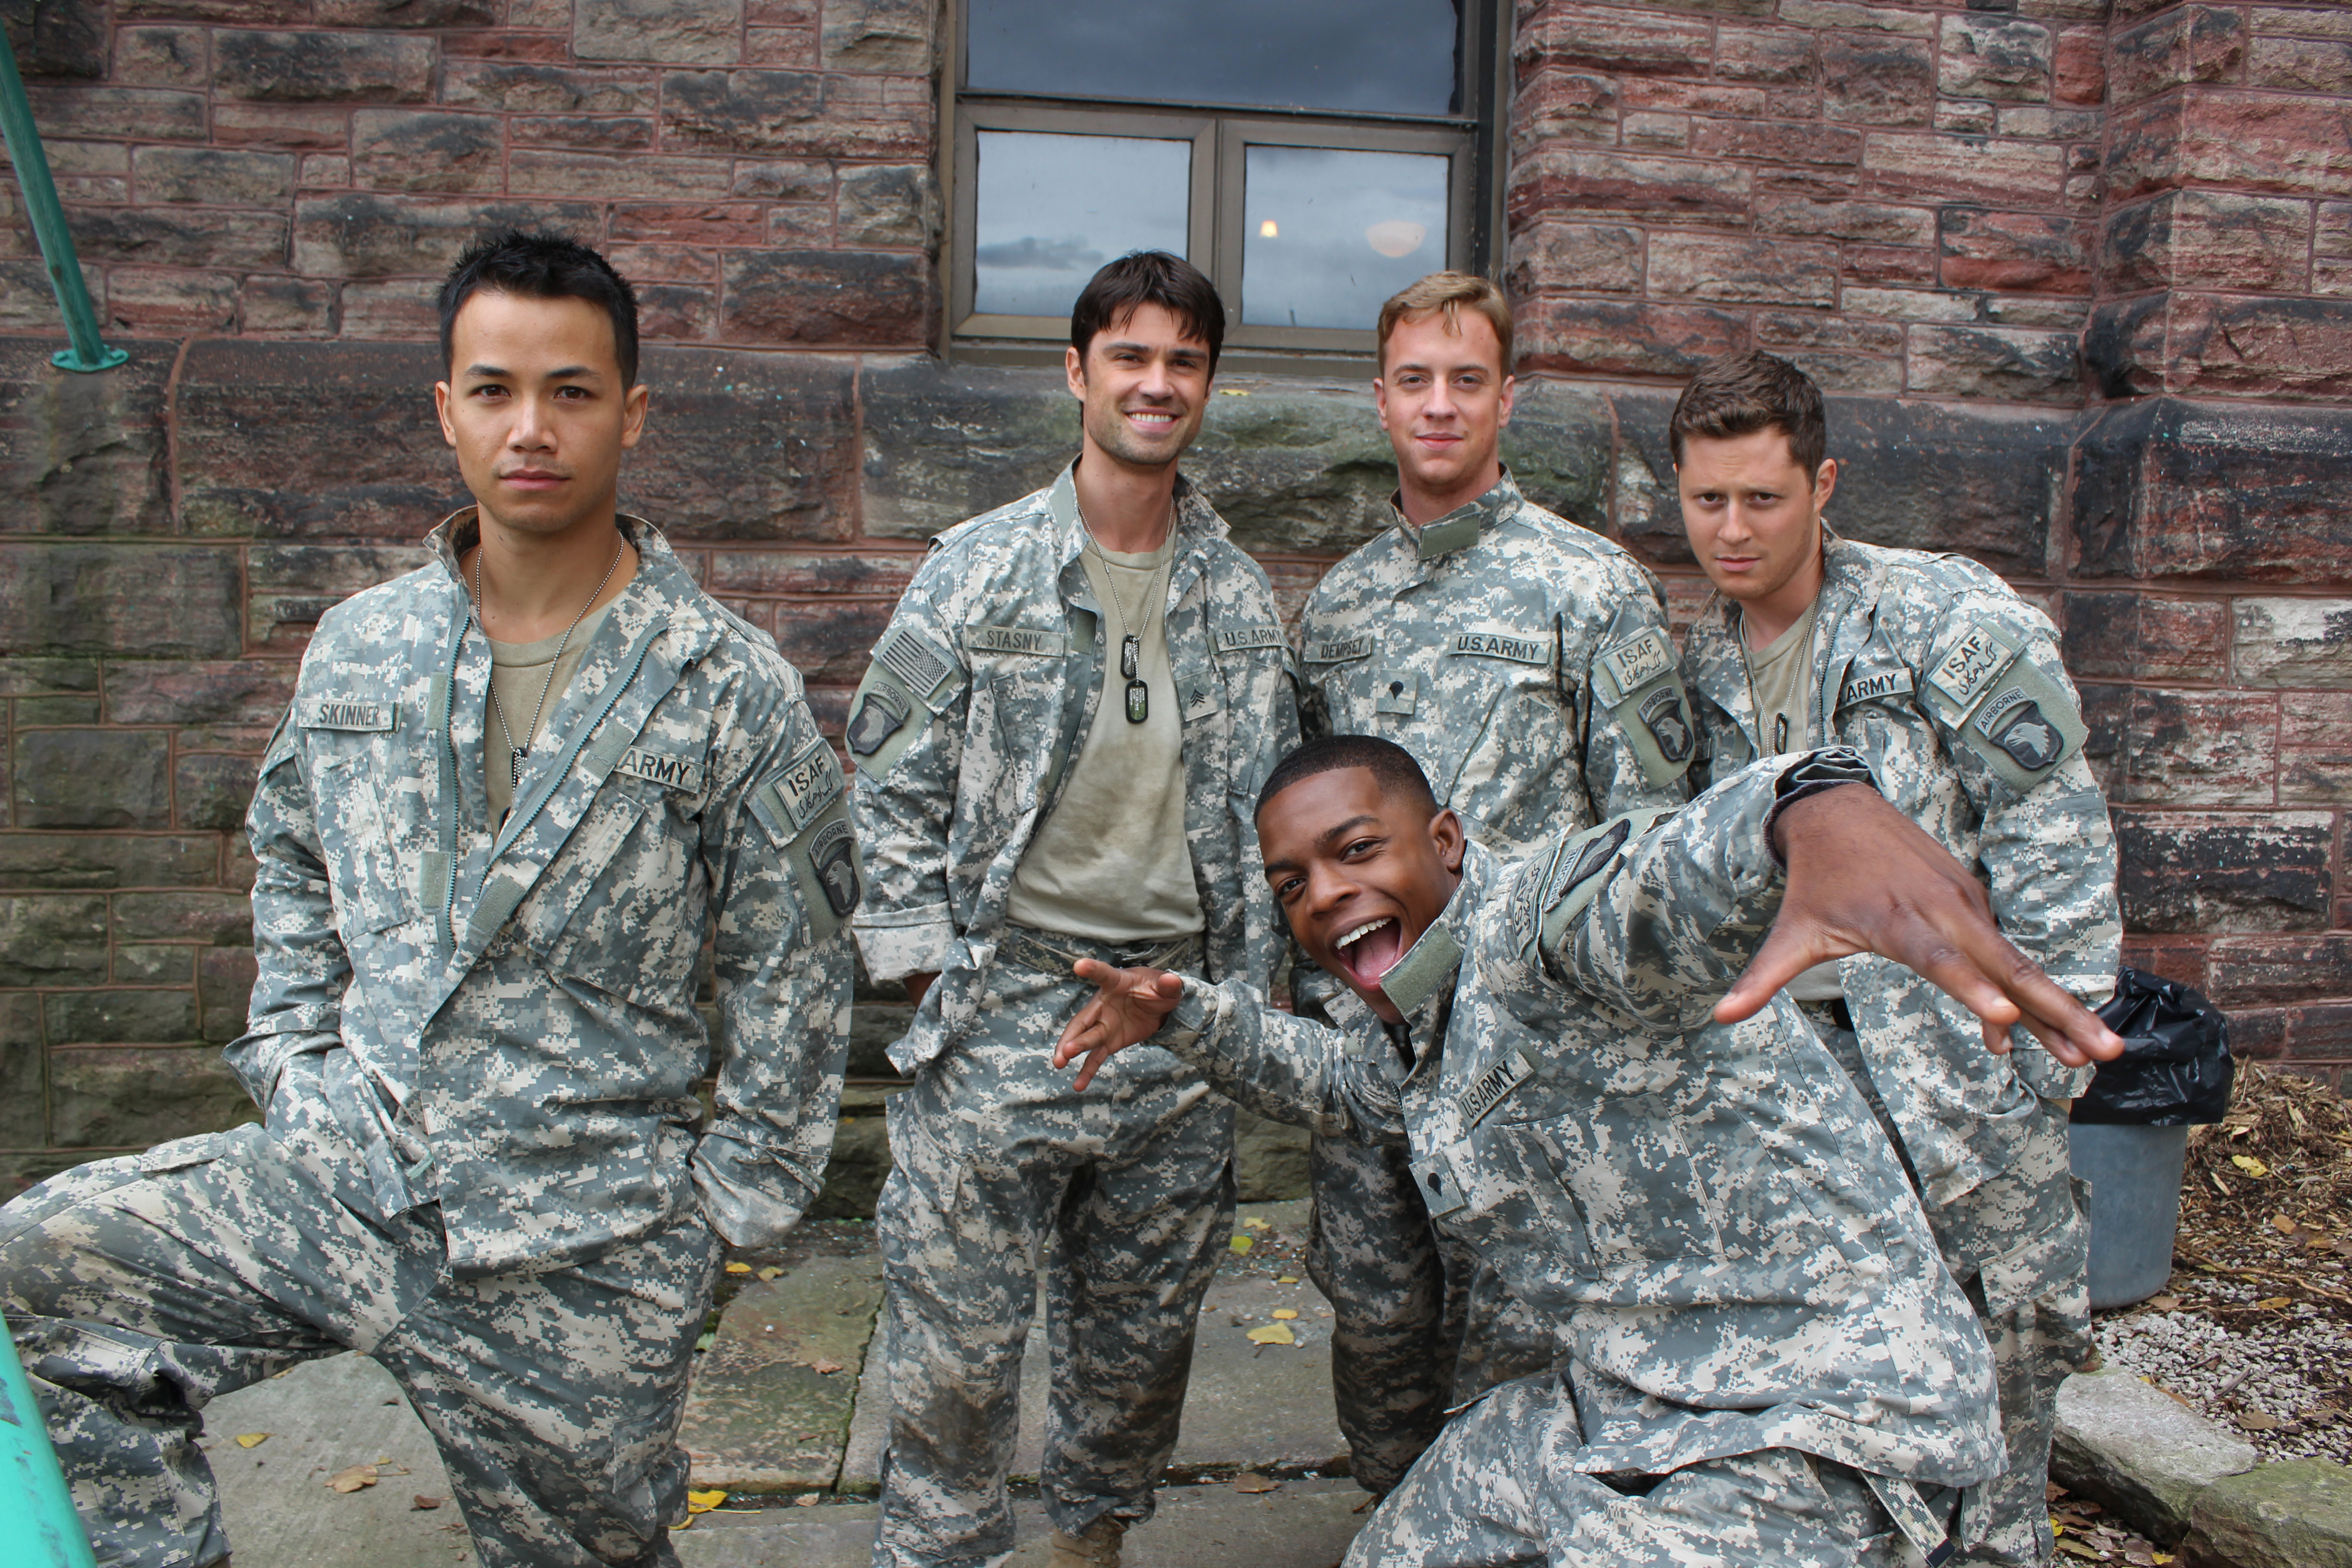 Shannon Kook, Corey Sevier, Will Bowes, Noah Reid, and Stephan James on the set of A Pride of Lions.